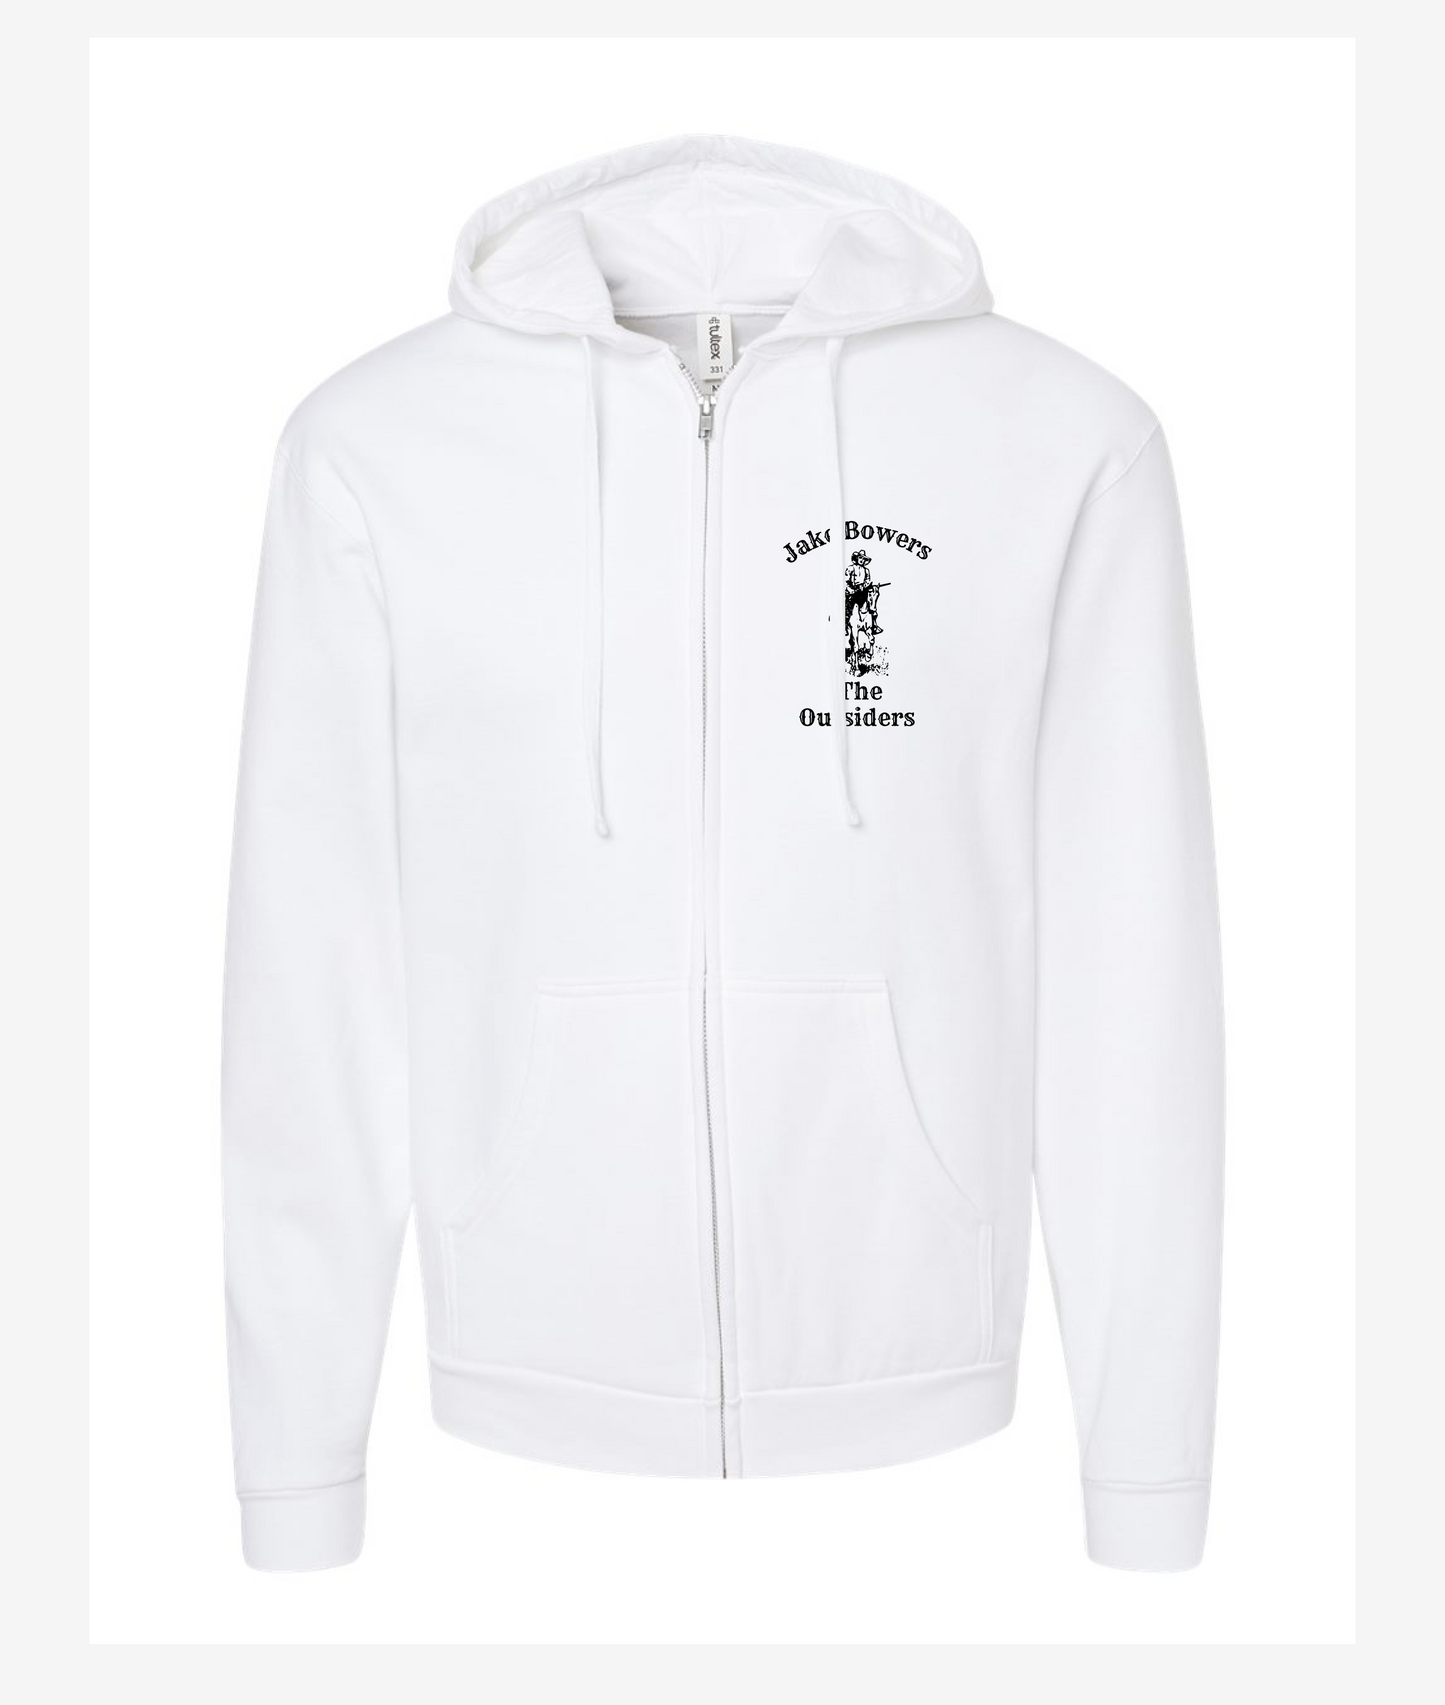 Jake Bowers Swag - The Outsiders - White Zip Hoodie